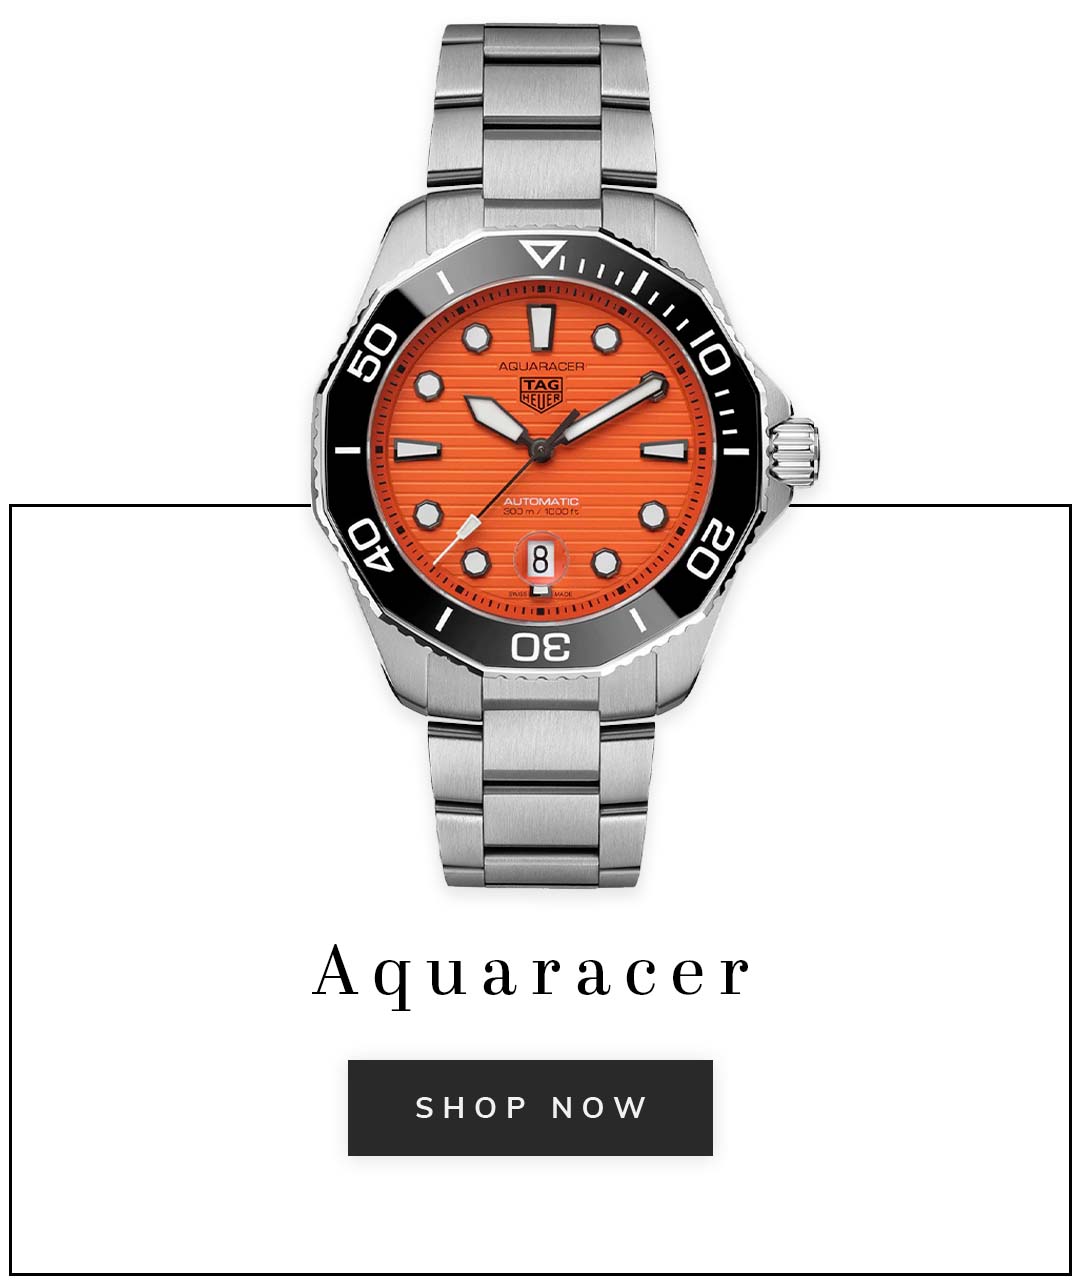 A TAG Heuer aqauracer watch with a orange dial and caption aquaracer shop now